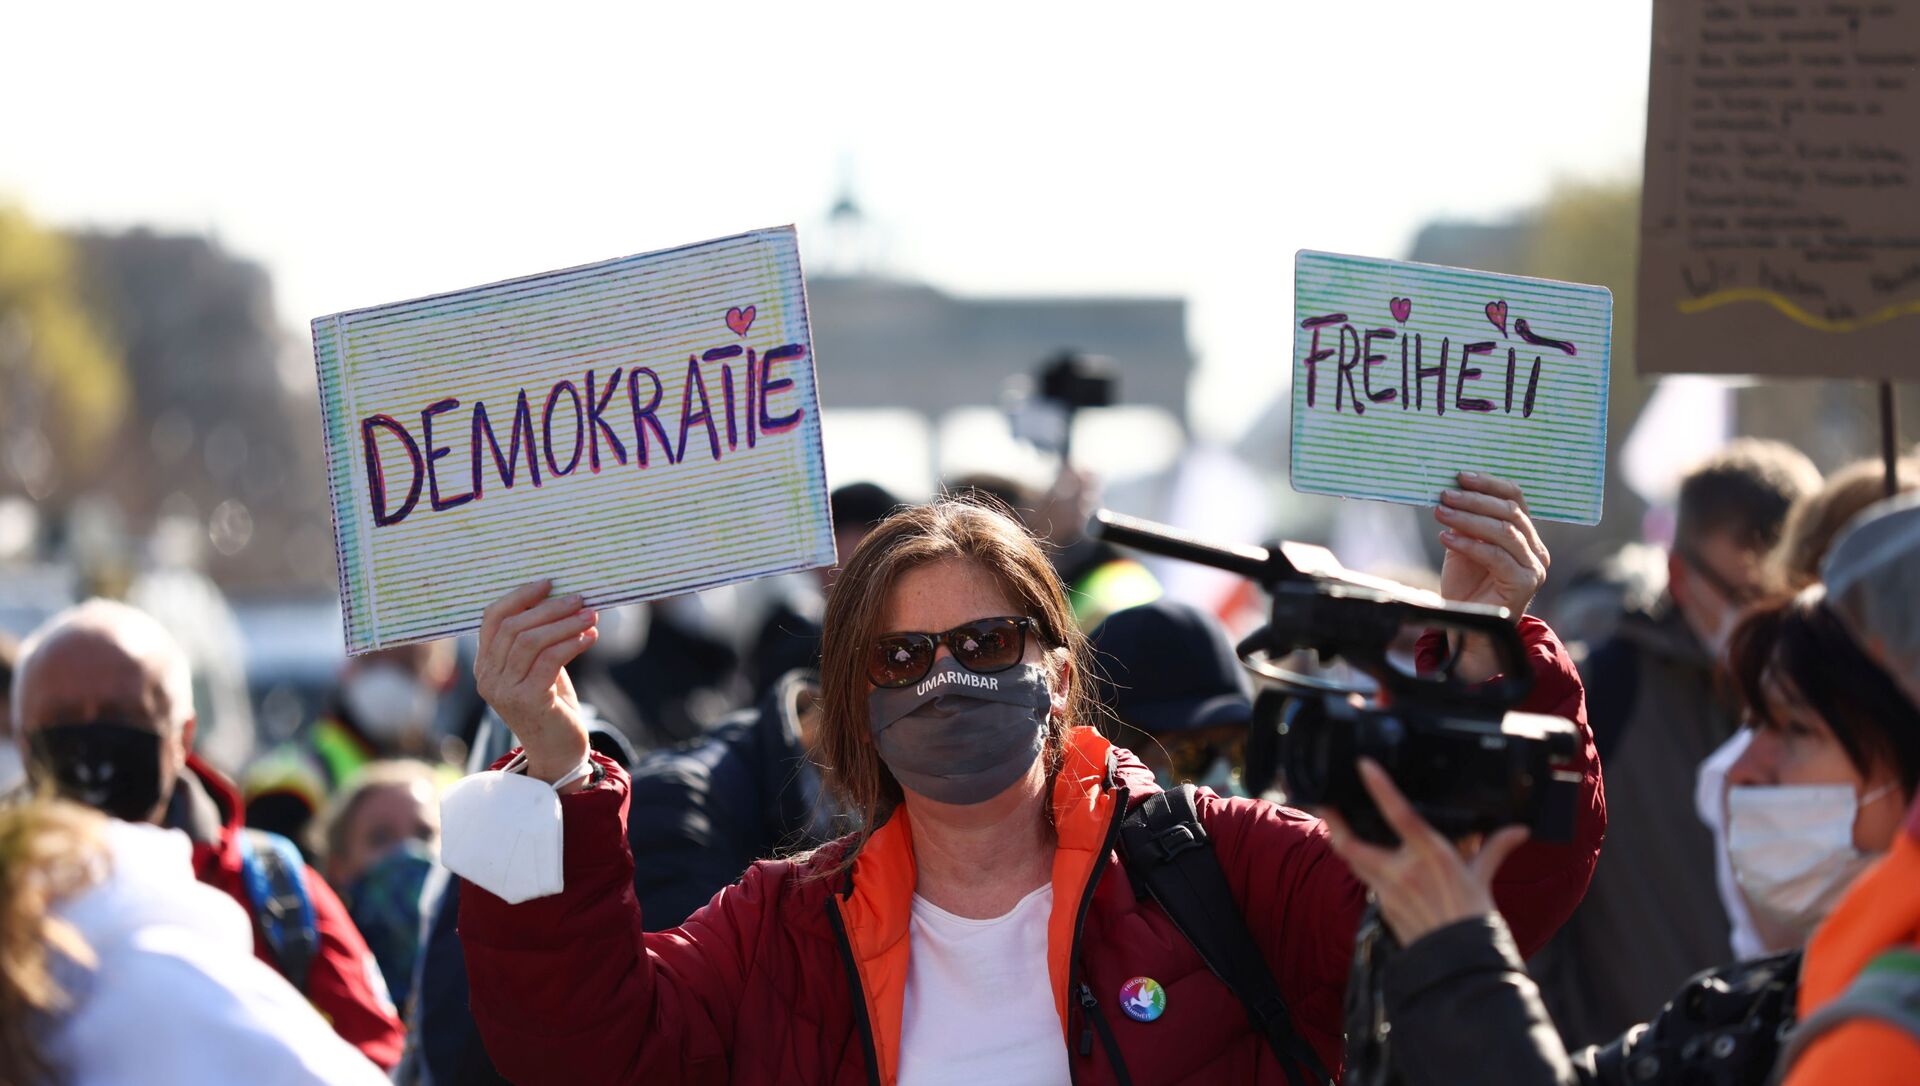 A demonstrator holds up signs reading democracy and freedom during a protest against the government measures to curb the spread of the coronavirus disease (COVID-19), on the day of discussion in the lower house of parliament Bundestag regarding additions for the Infection Protection Act, in Berlin, Germany April 21, 2021 - Sputnik International, 1920, 21.04.2021